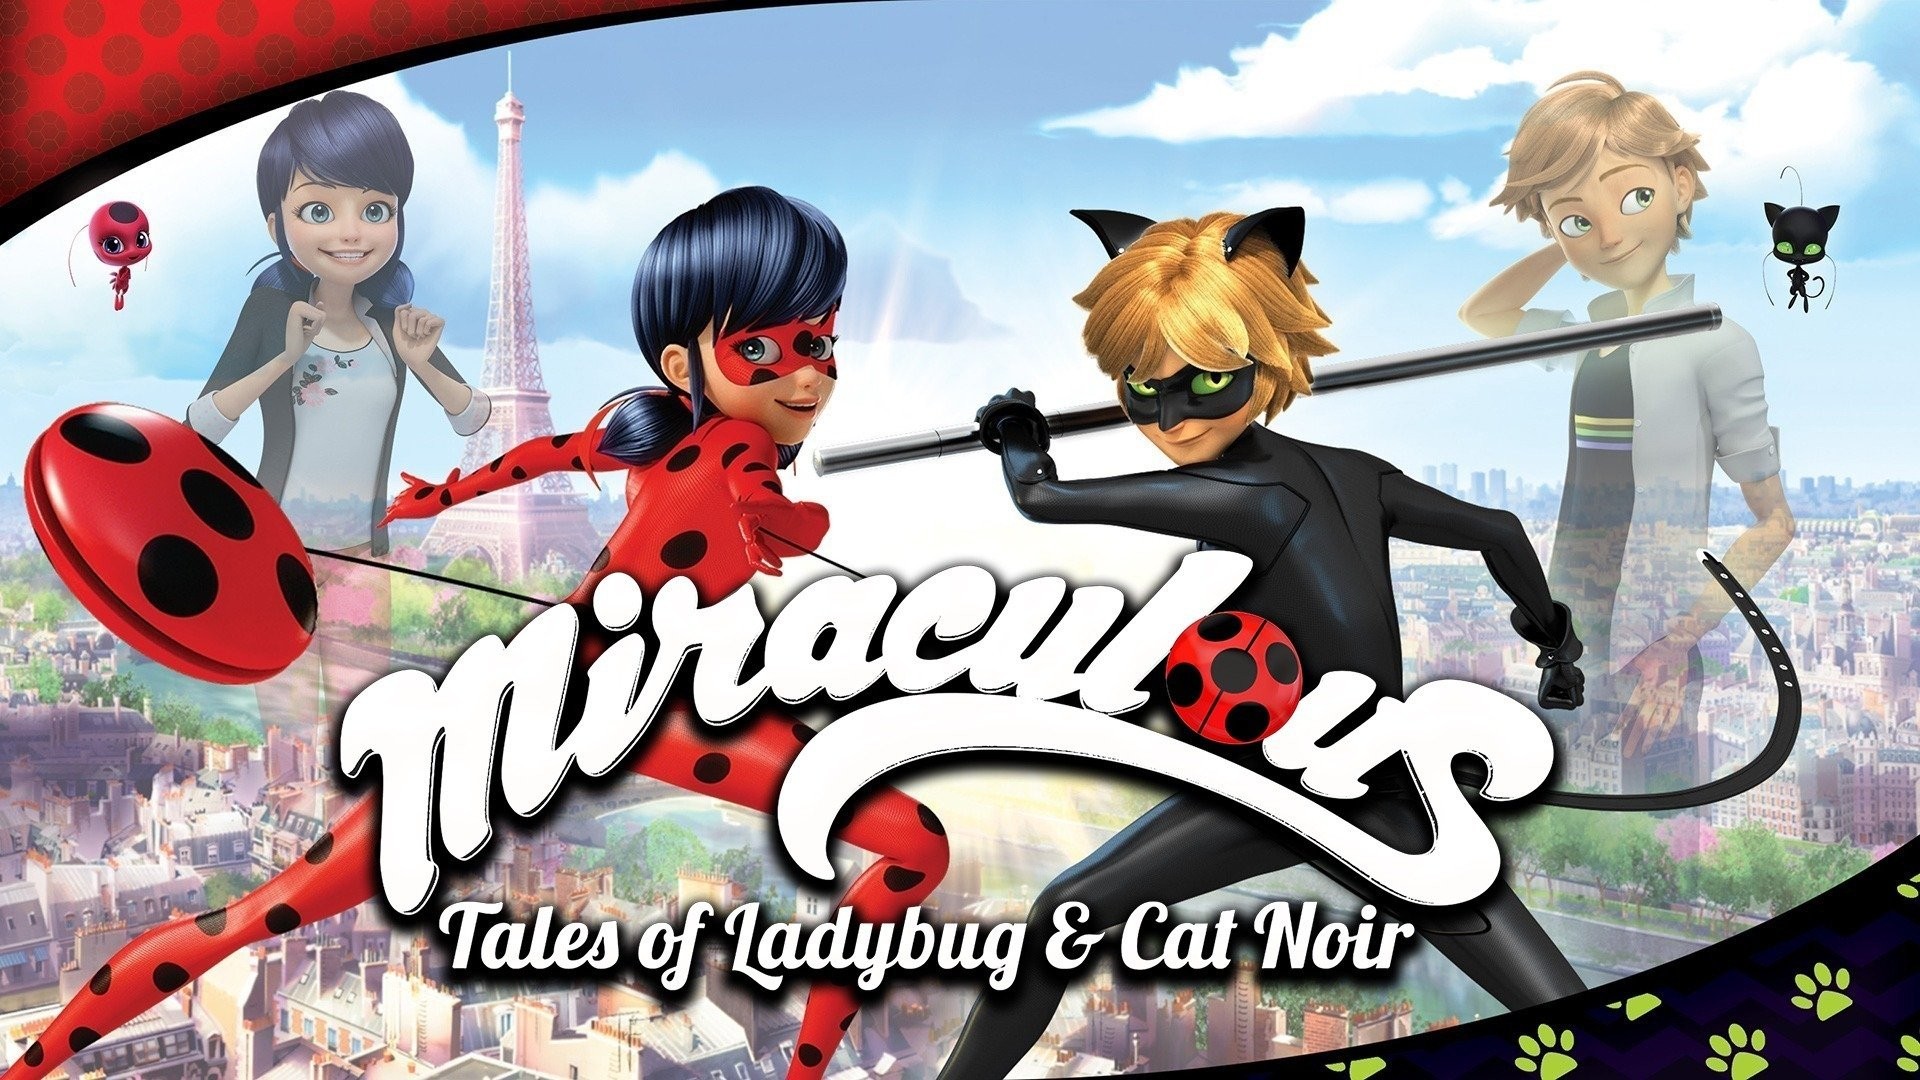 Miraculous: Tales of Ladybug and Cat Noir - Rotten Tomatoes